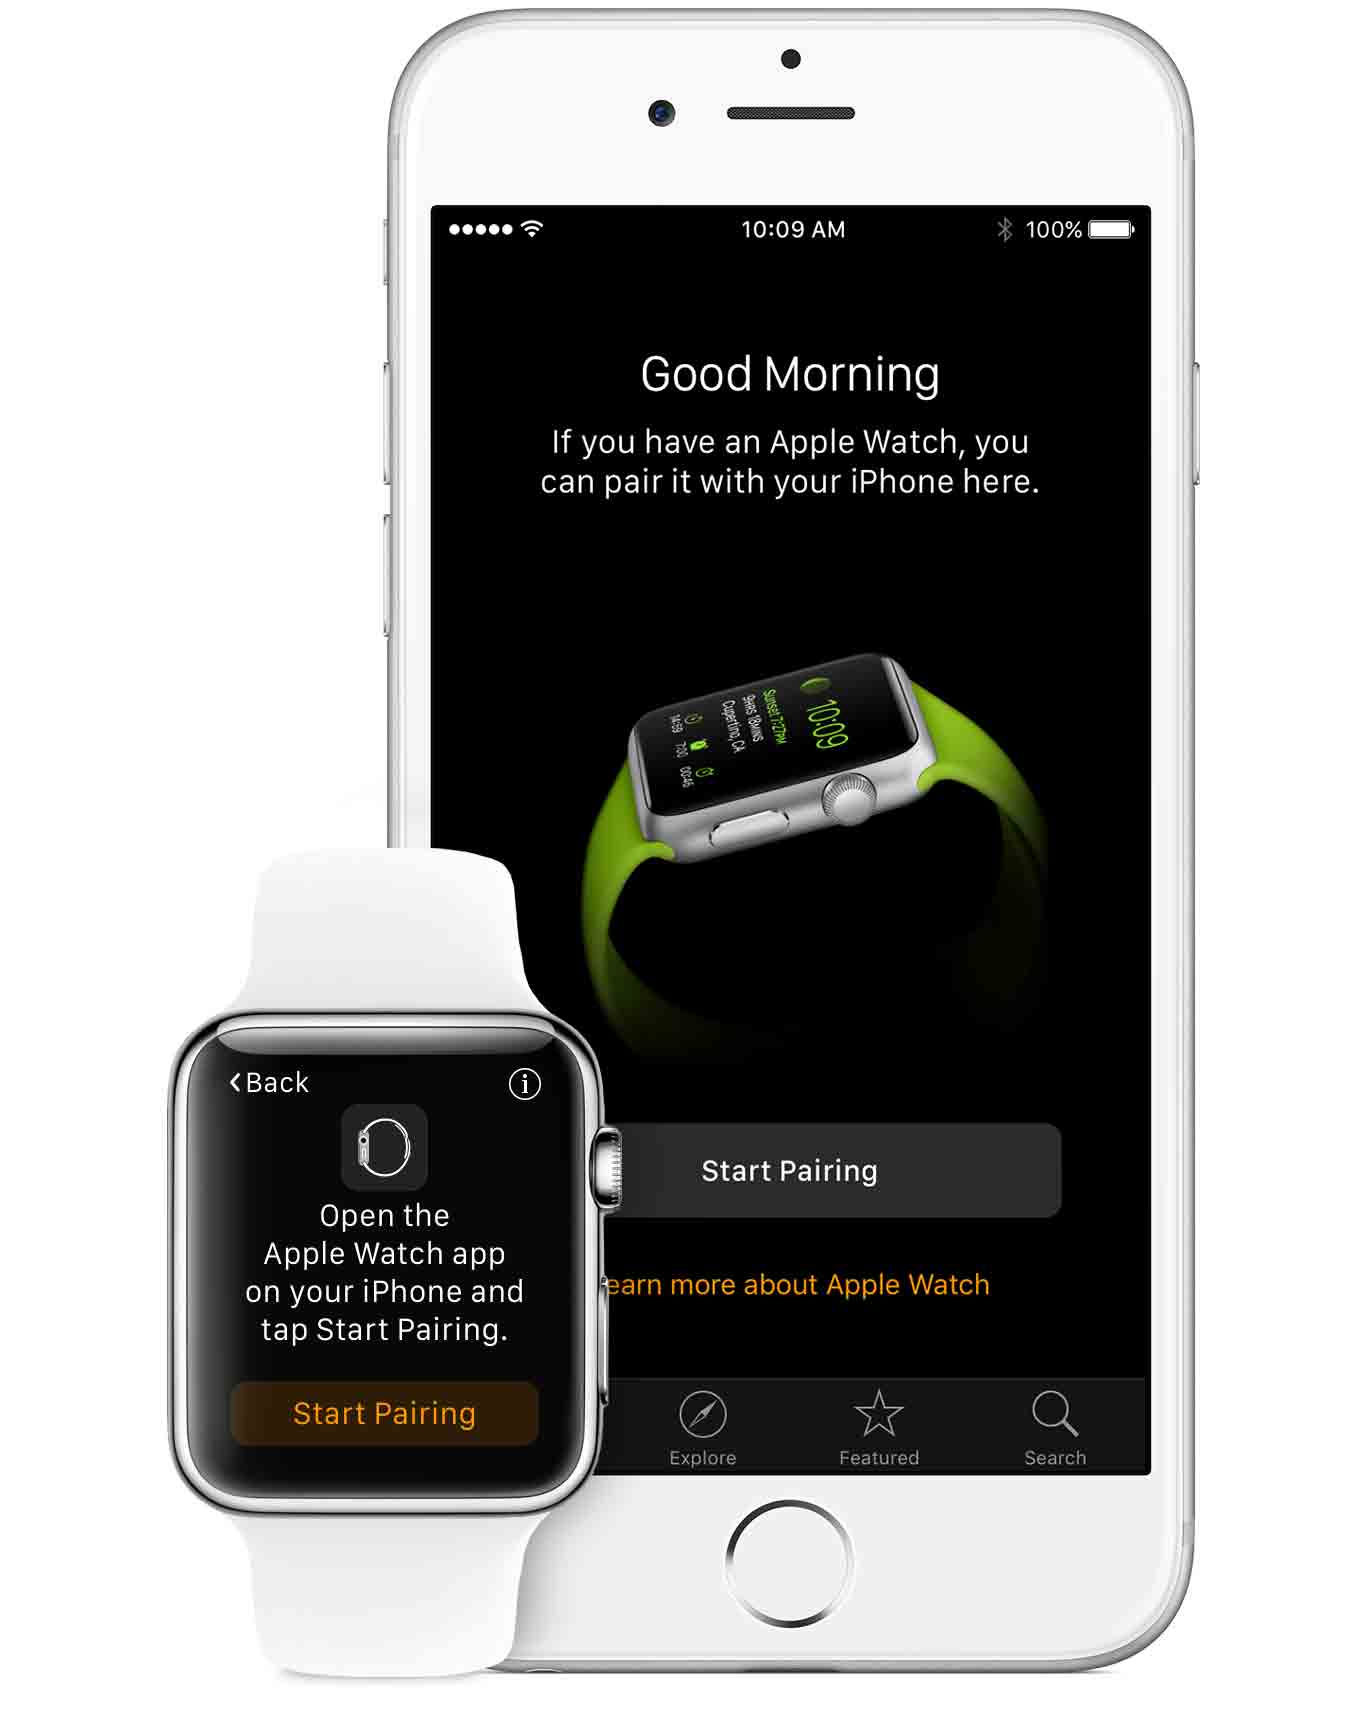 Set up and pair your Apple Watch